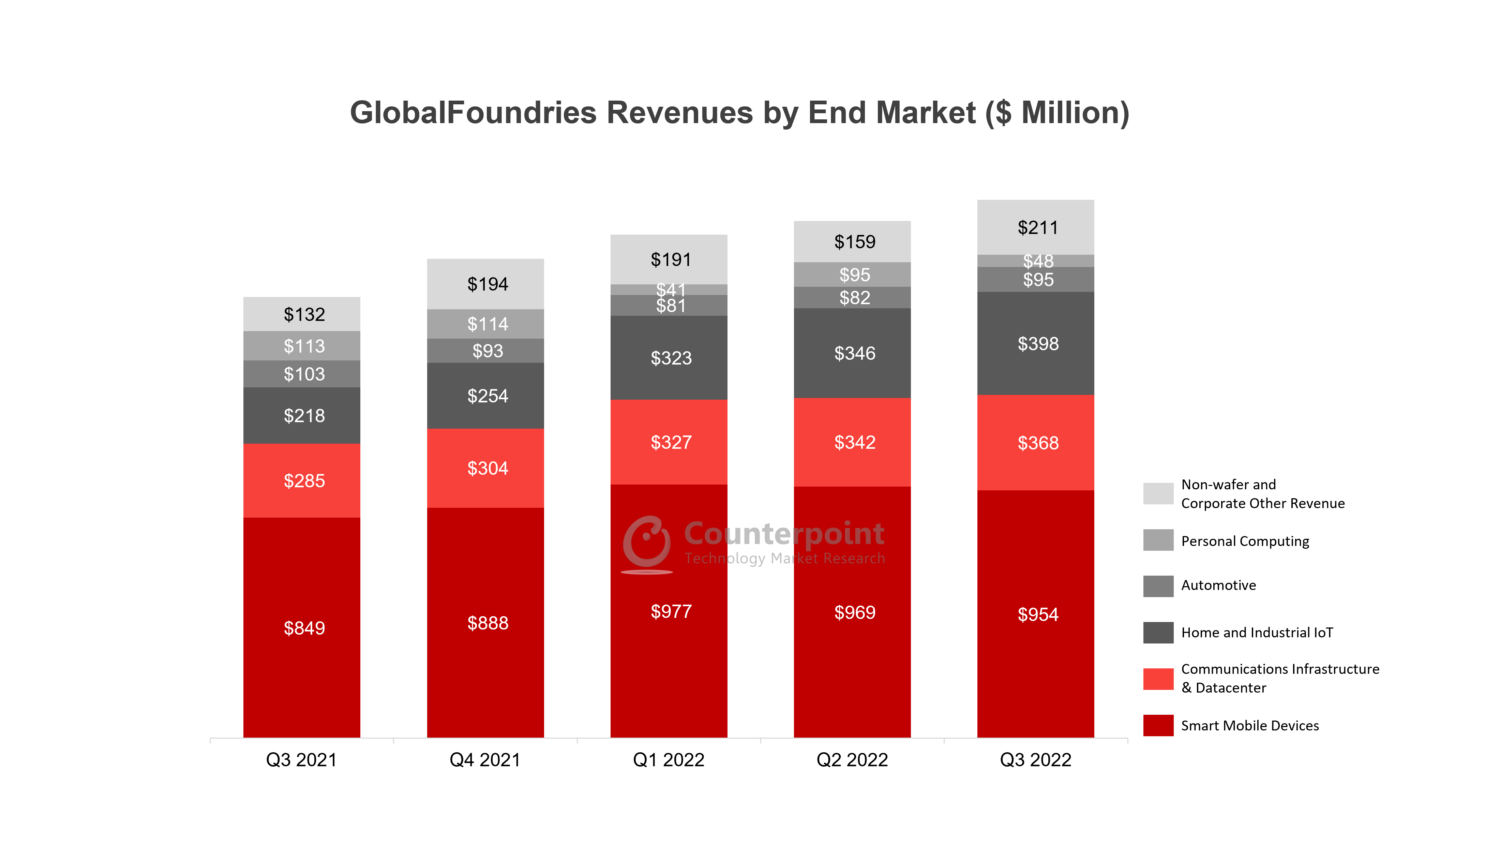 GlobalFoundries-Revenues-Q3 "Counterpoint Research"